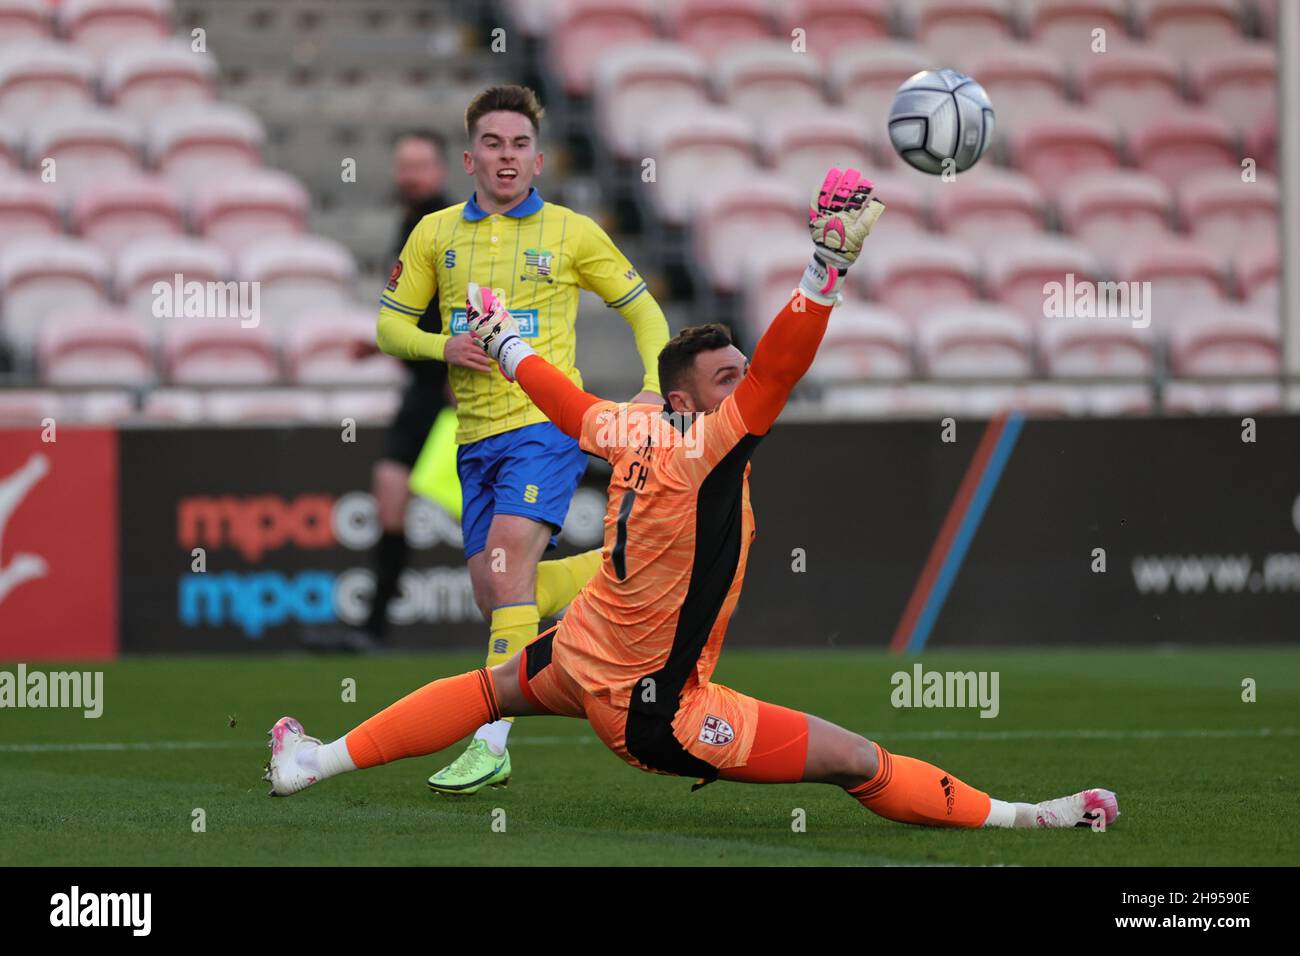 SOLIHULL, ENGLAND. DECEMBER 4TH 2021. Joe Sbarra of Solihull Moors scores his sides first goal during the Vanarama National League match between Solihull Moors and Woking FC at the Armco Stadium, Solihull on Saturday 4th December 2021. (Credit: James Holyoak/Alamy Live News) Stock Photo